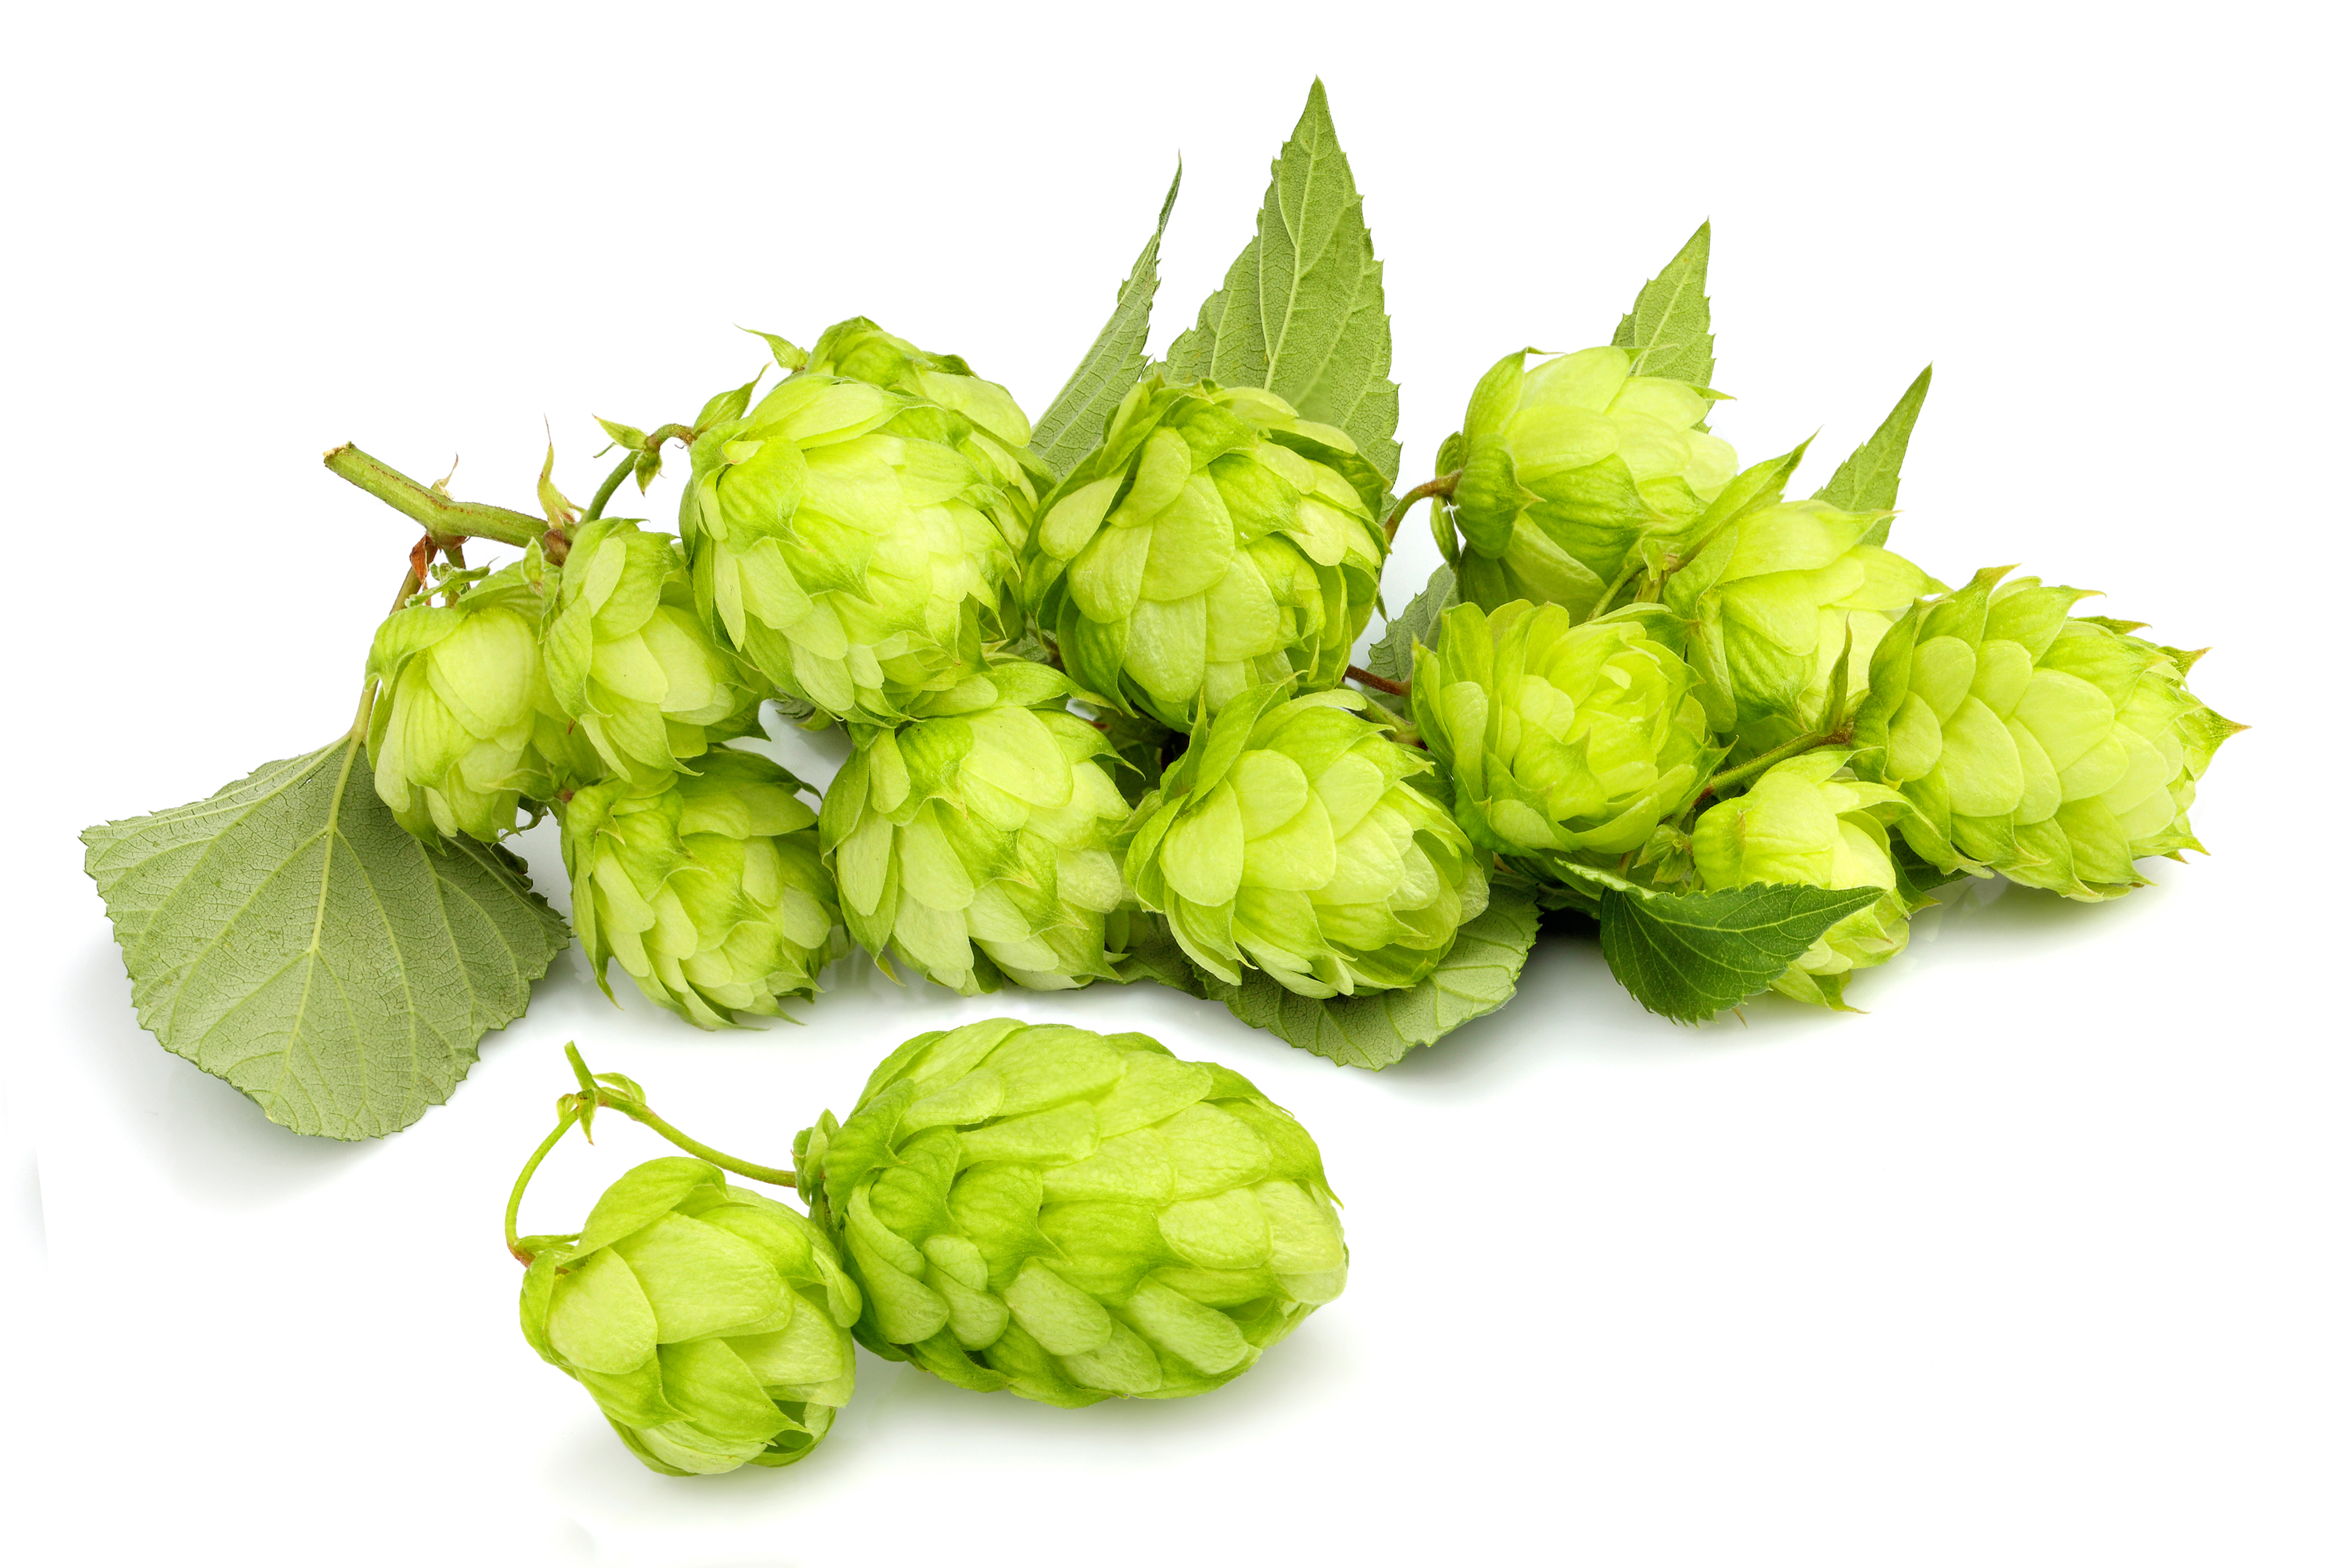 Hops as a cause of high estrogen in men and women